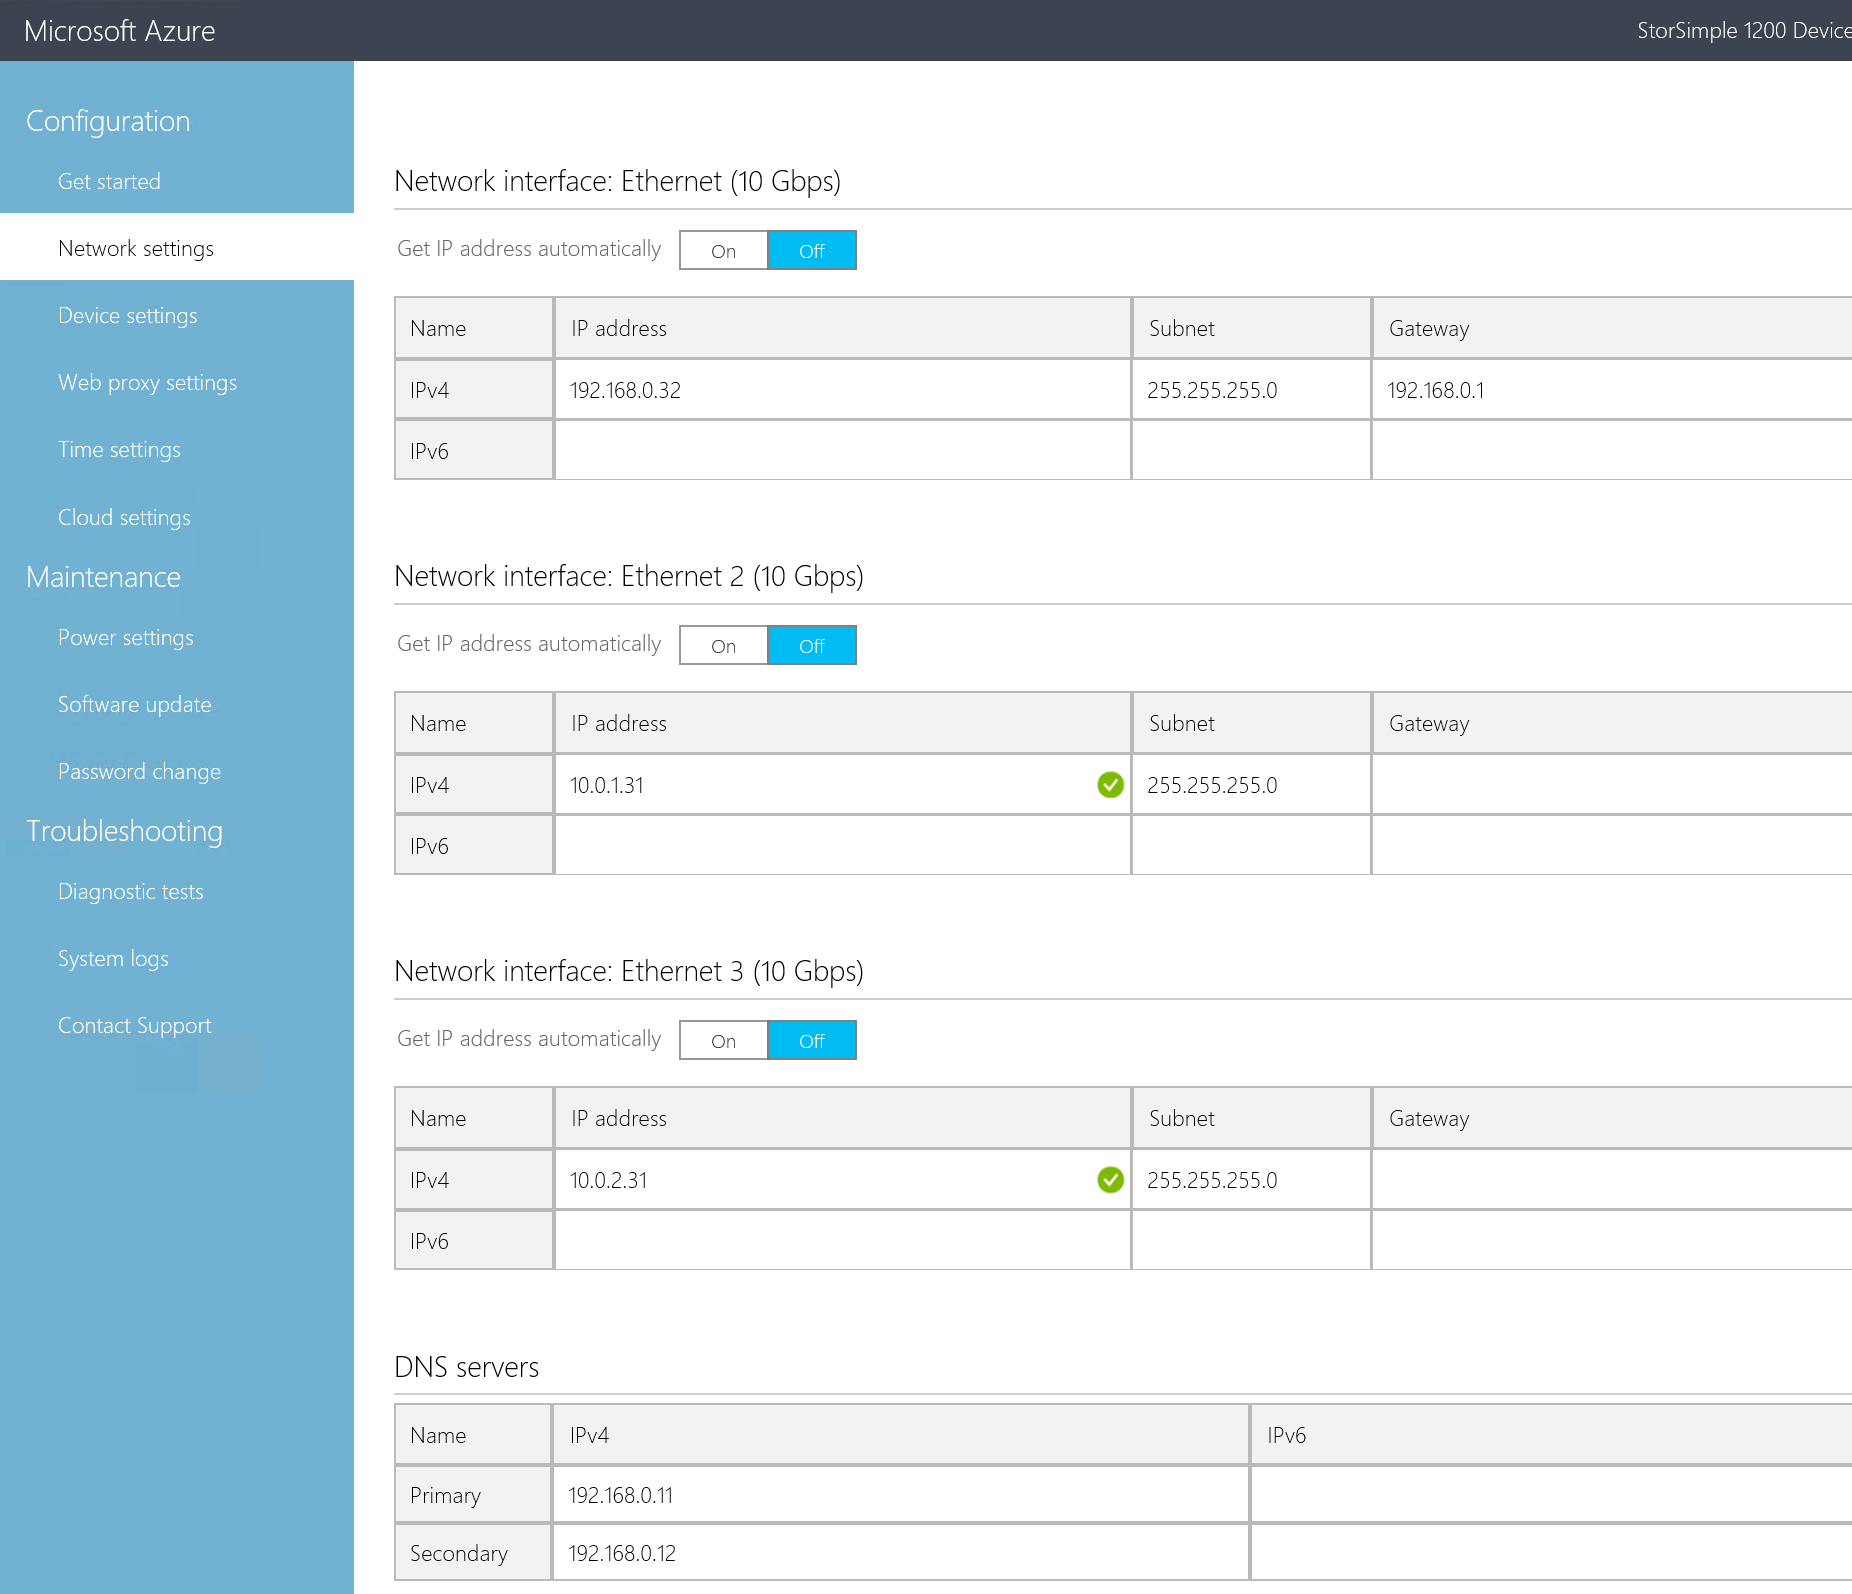 Configuring management and iSCSI NICs in StorSimple virtual appliance [Image Credit: Aidan Finn]